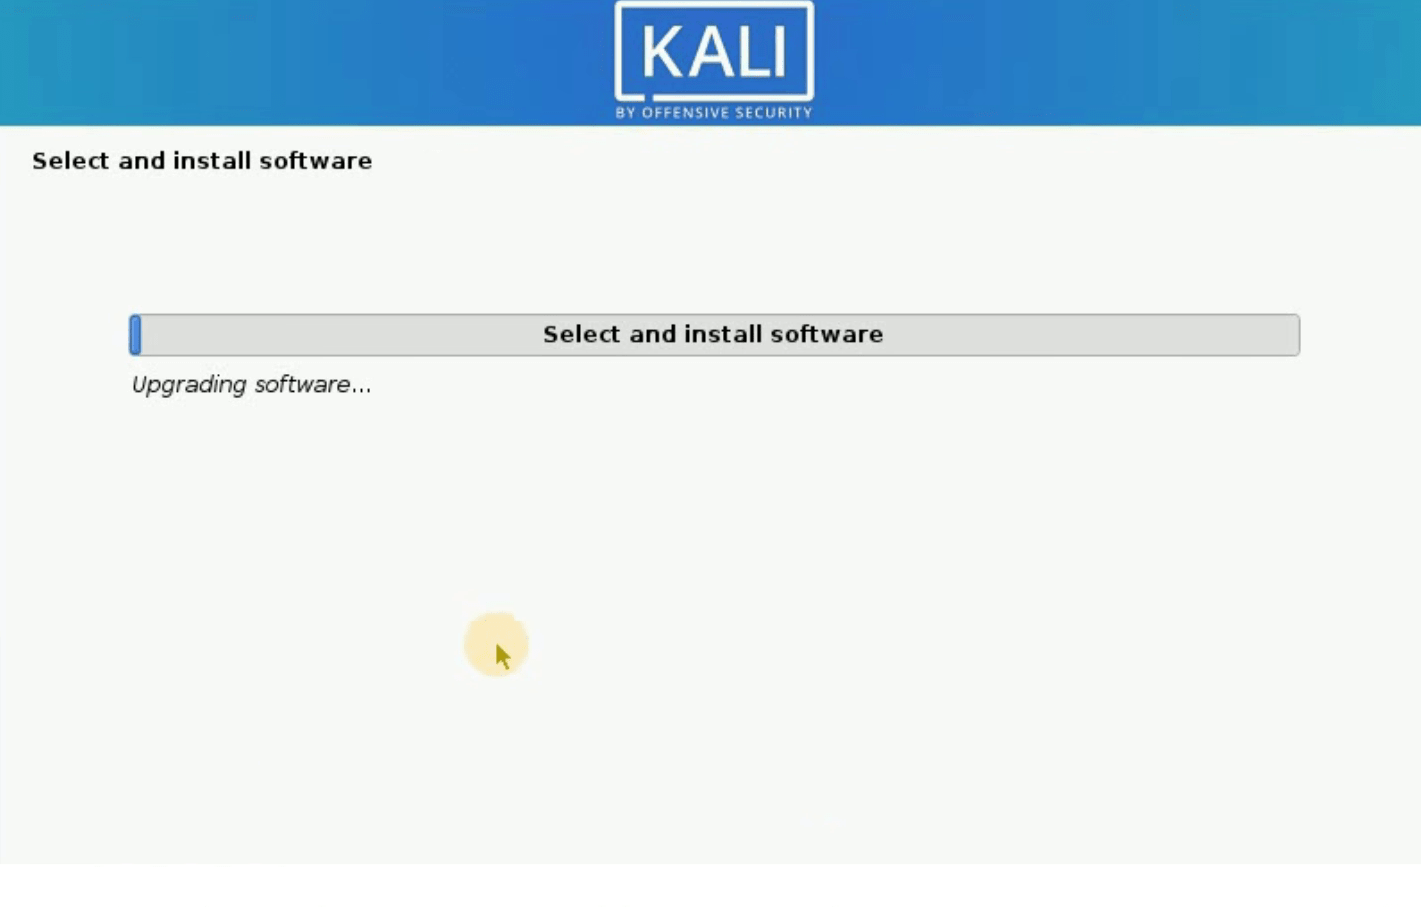 Install additional software packages 